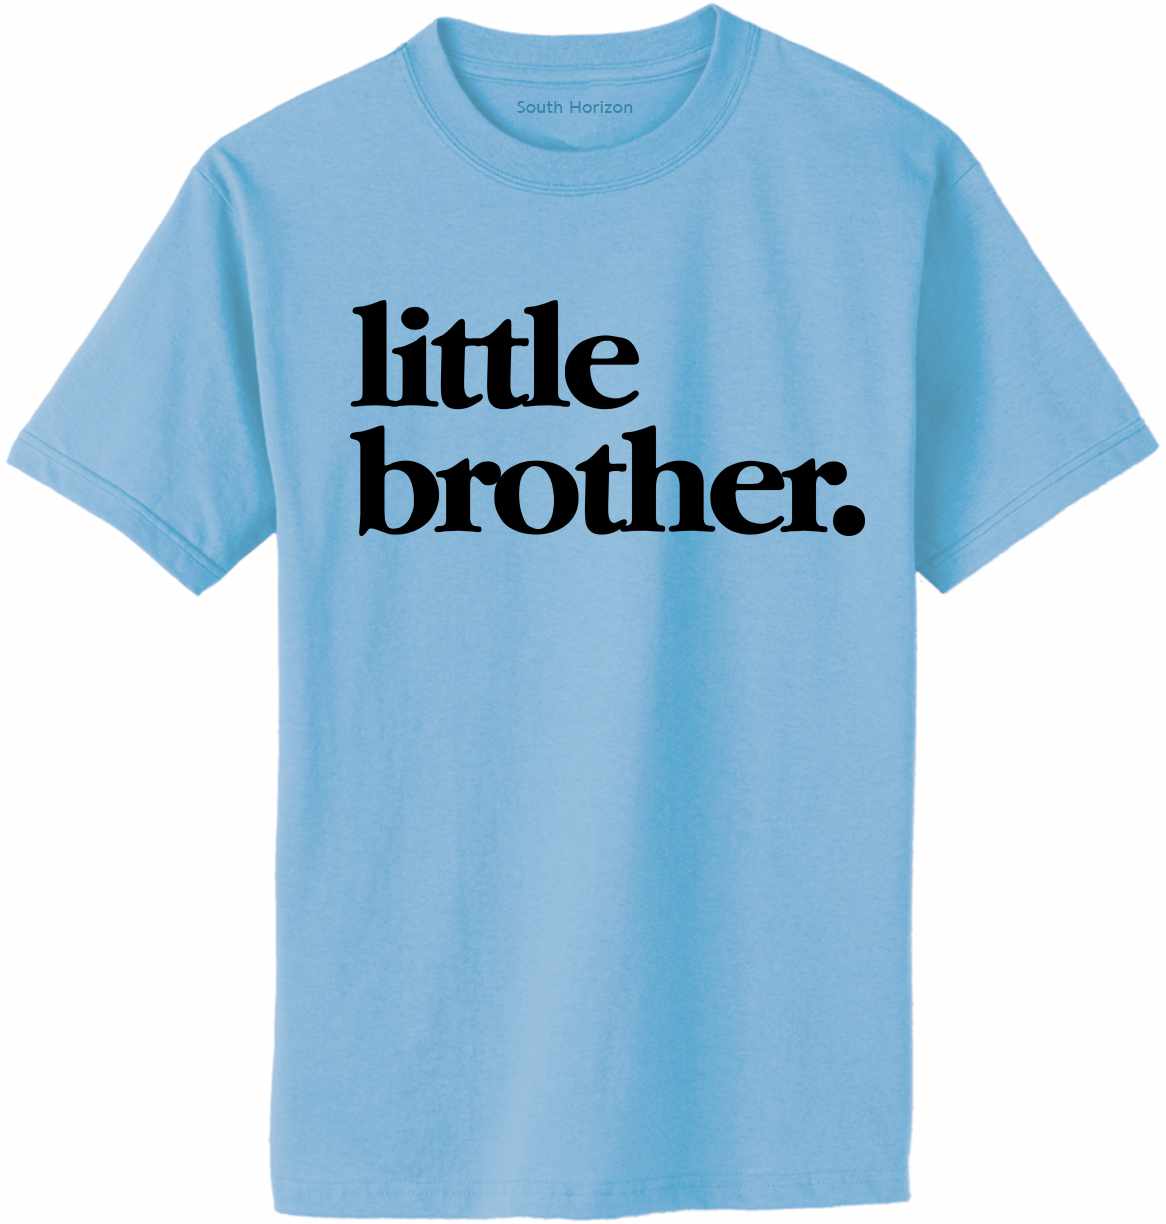 Little Brother on Adult T-Shirt